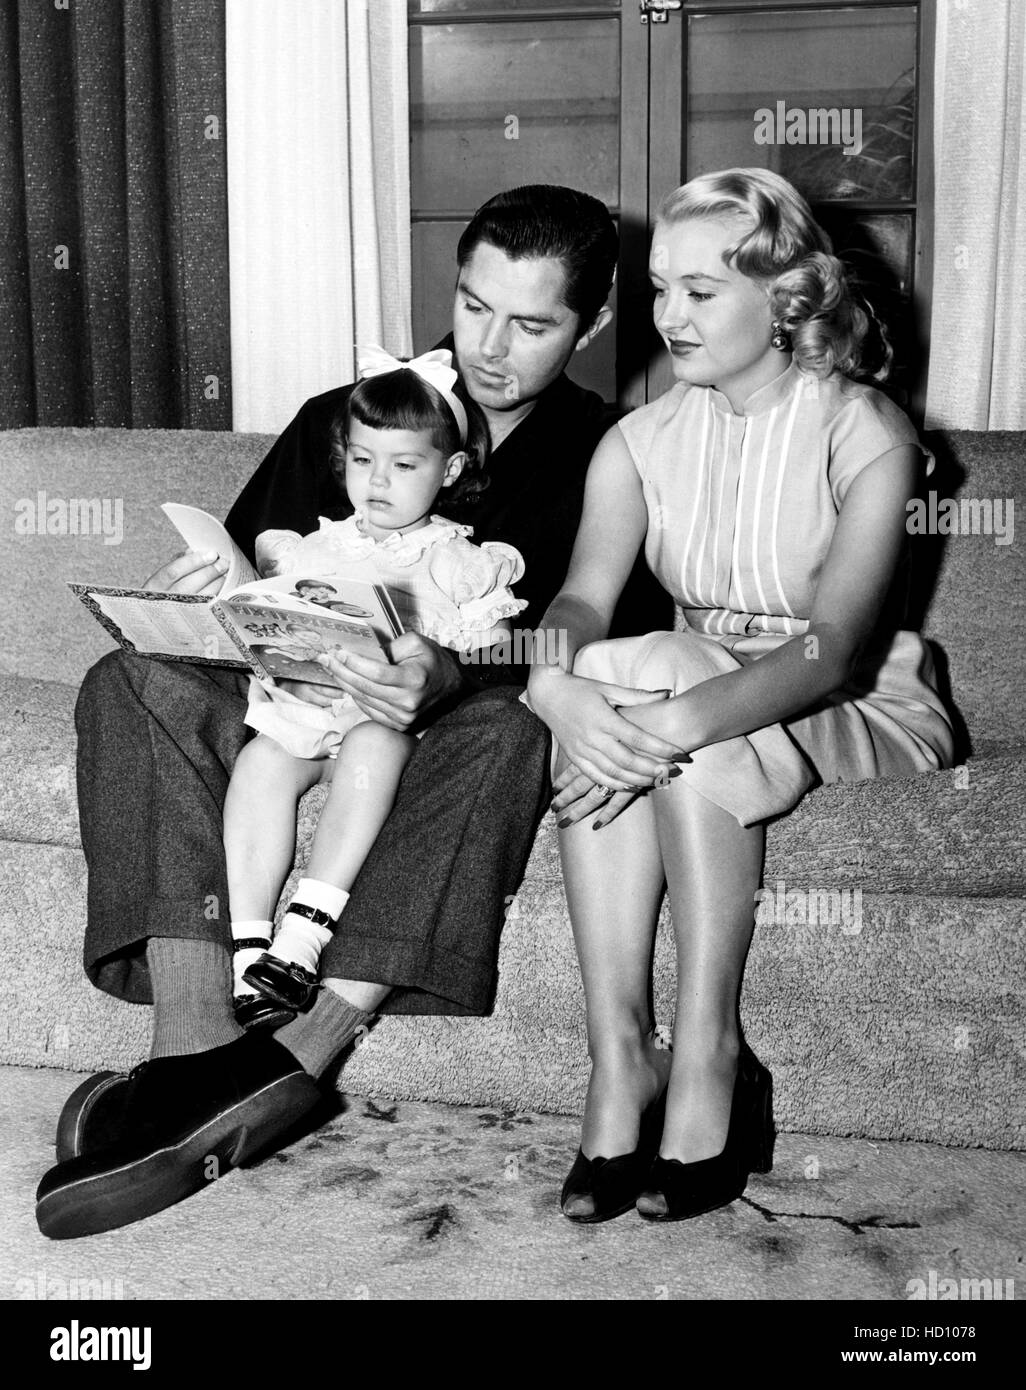 Jack Buetel, left, with his second wife, Gloria Buetel, and their daughter, Cynthia Buetel, 1952 Stock Photo